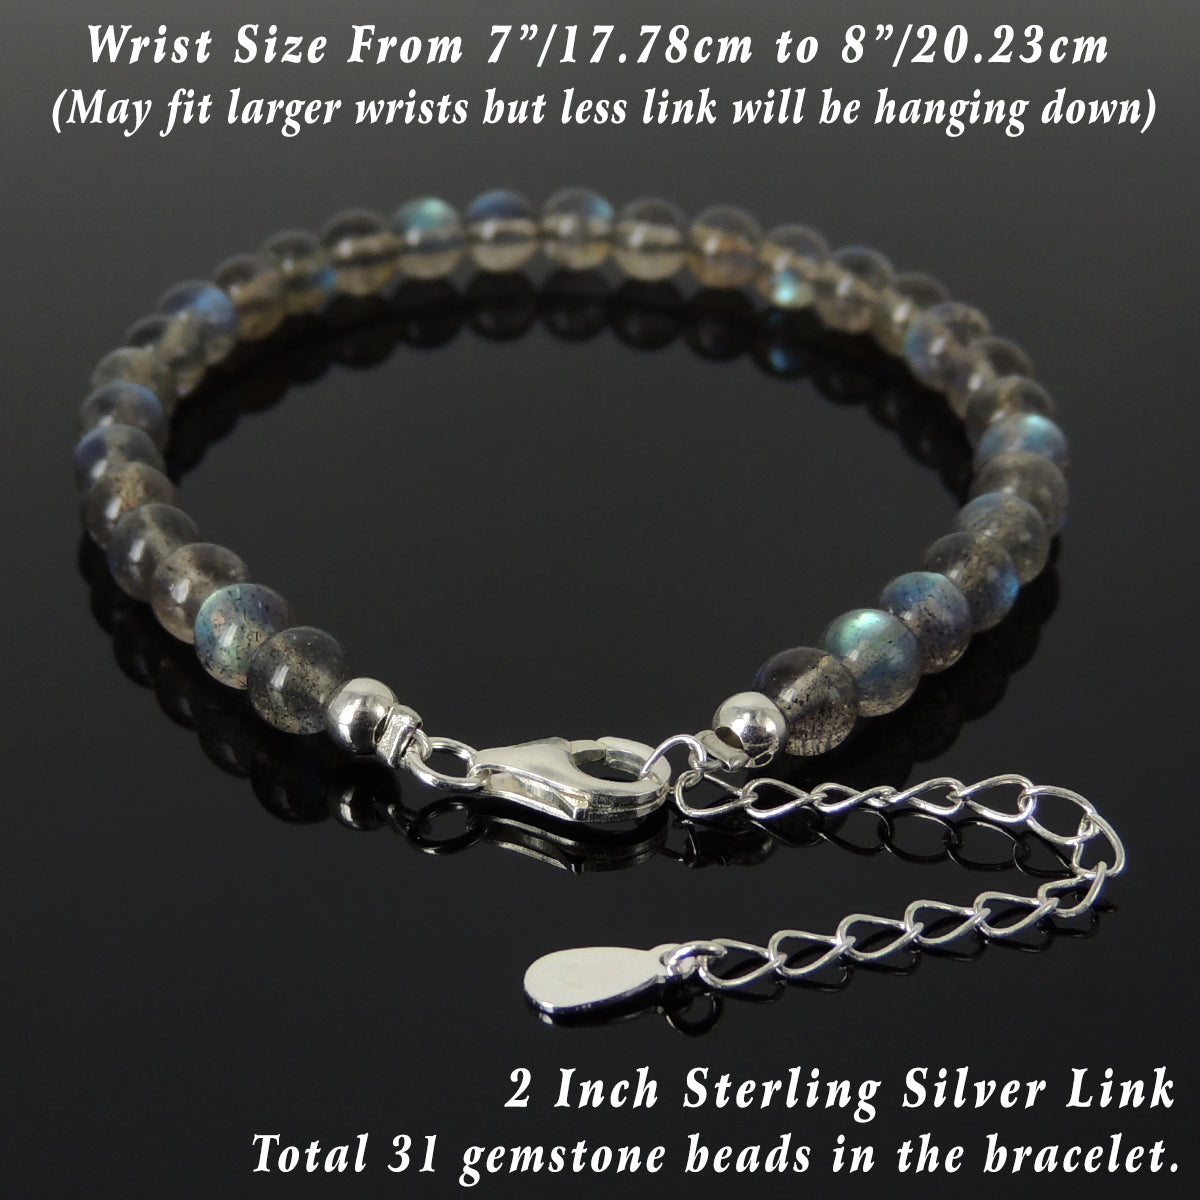 Rare 5A Labradorite Healing Gemstone Bracelet with S925 Sterling Silver Chain & Clasp - Handmade by Gem & Silver BR1303